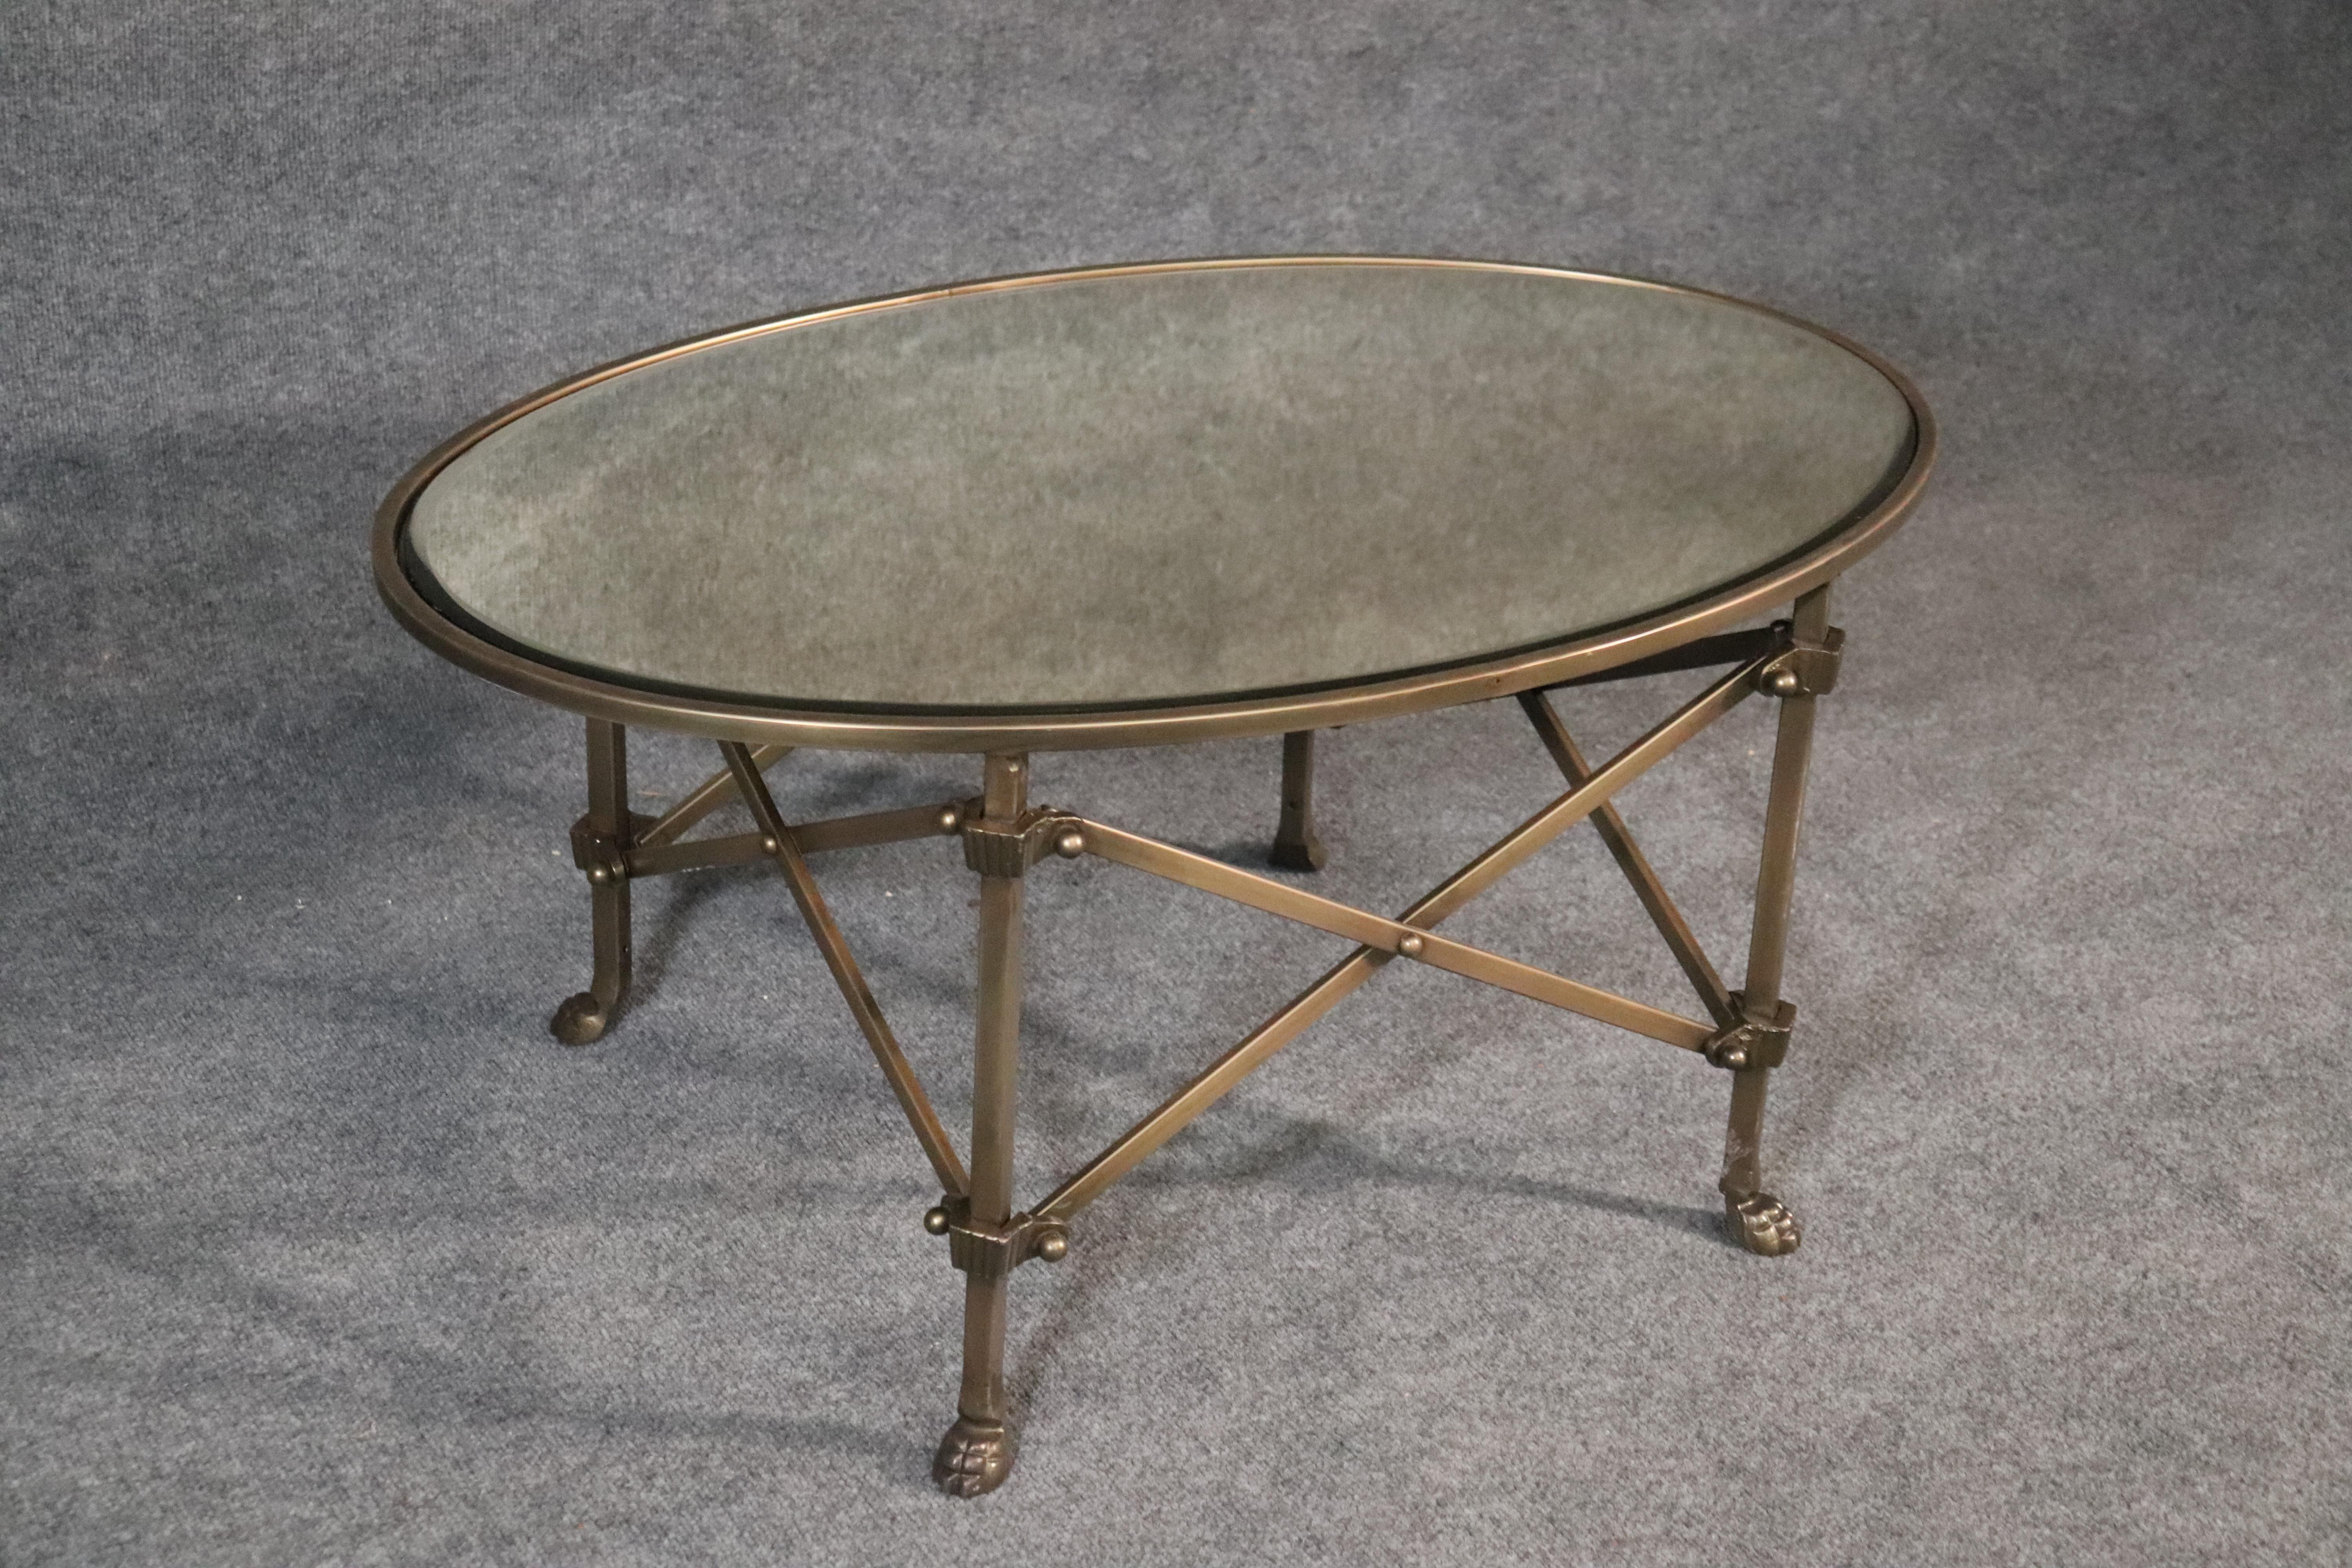 This is a gorgeous sold brass coffee table with a perfect mirrored top. The table has beautiful lines and is sleek and sophisticated with paw feet and architectural links on the base. The table measures: 36 wide x 24 deep x 17 tall.